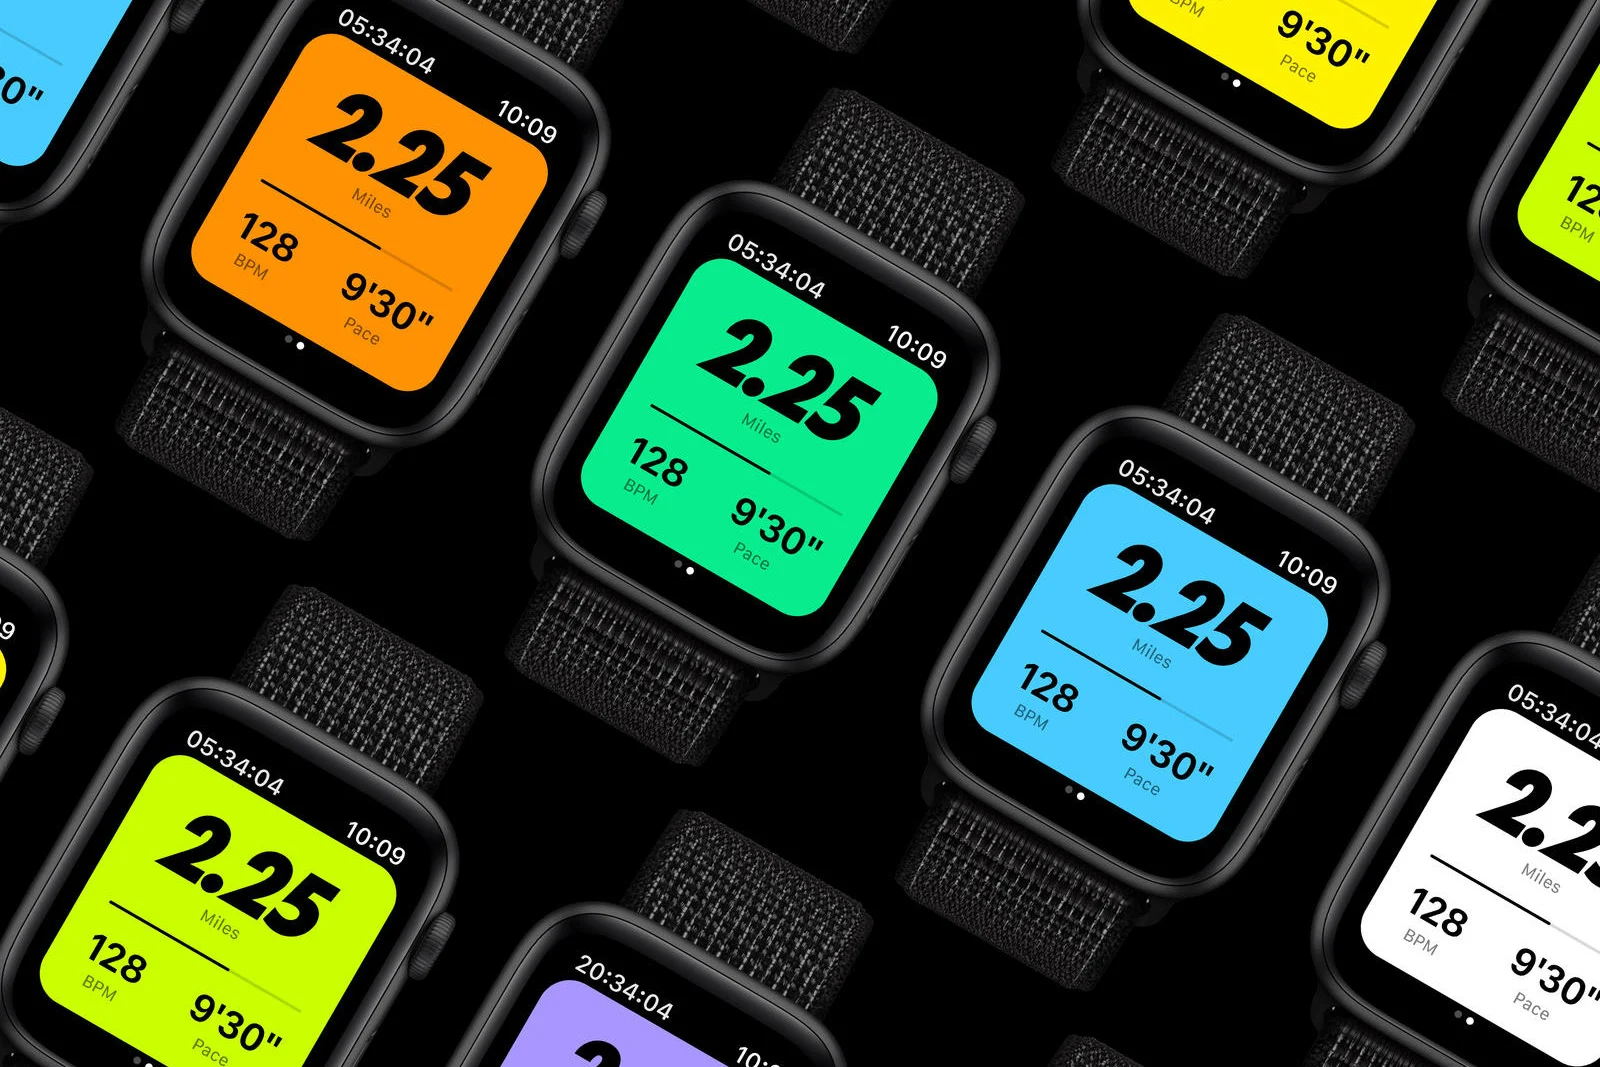 pájaro pelota Parlamento Nike Run Club's Apple Watch app gives you more incentives to keep running |  Engadget